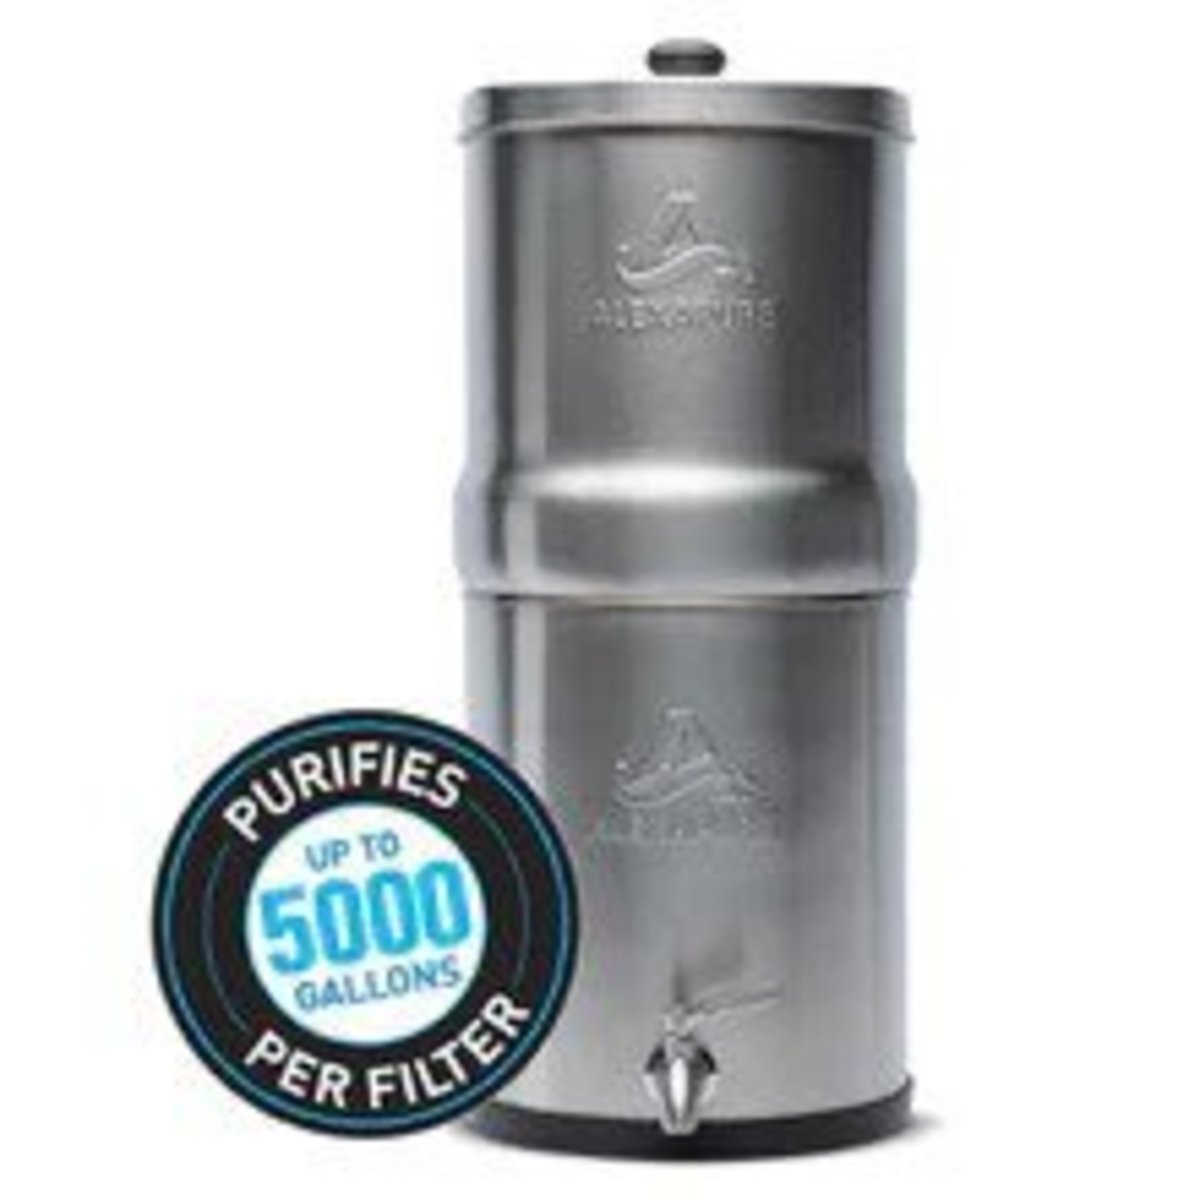 Water Filtration at Home and On the Go